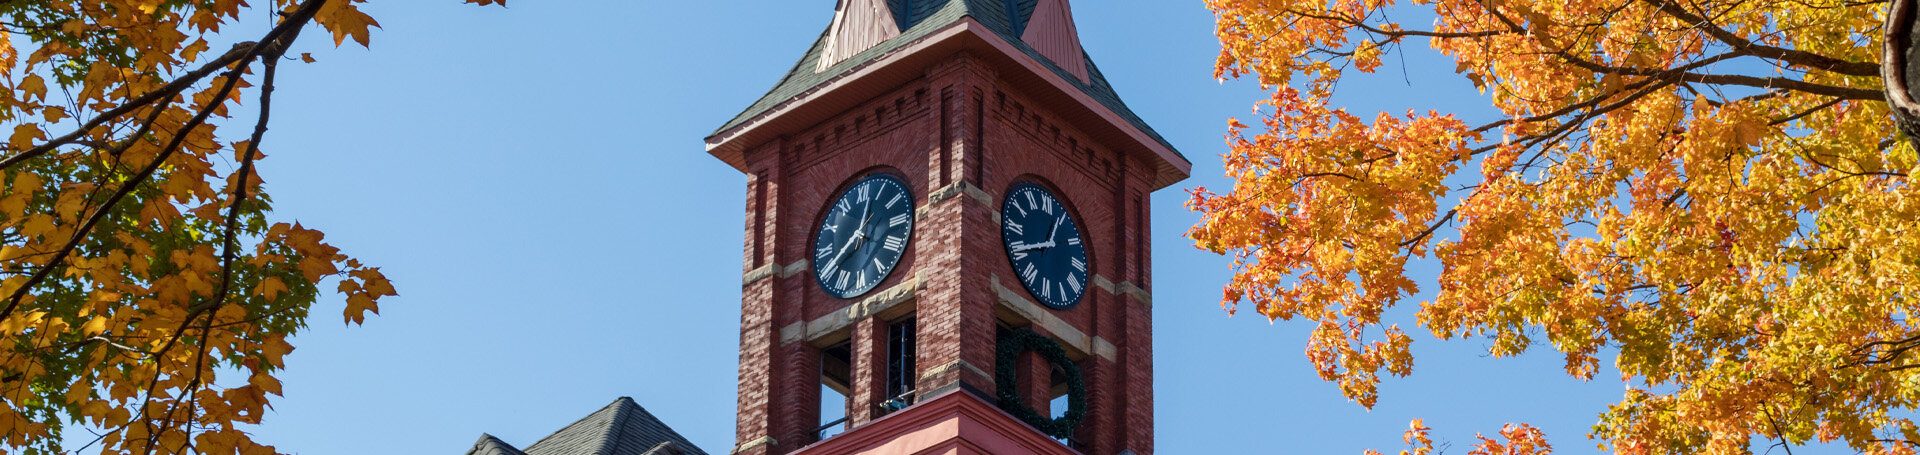 This is an image of the clock tower in the City of Hastings